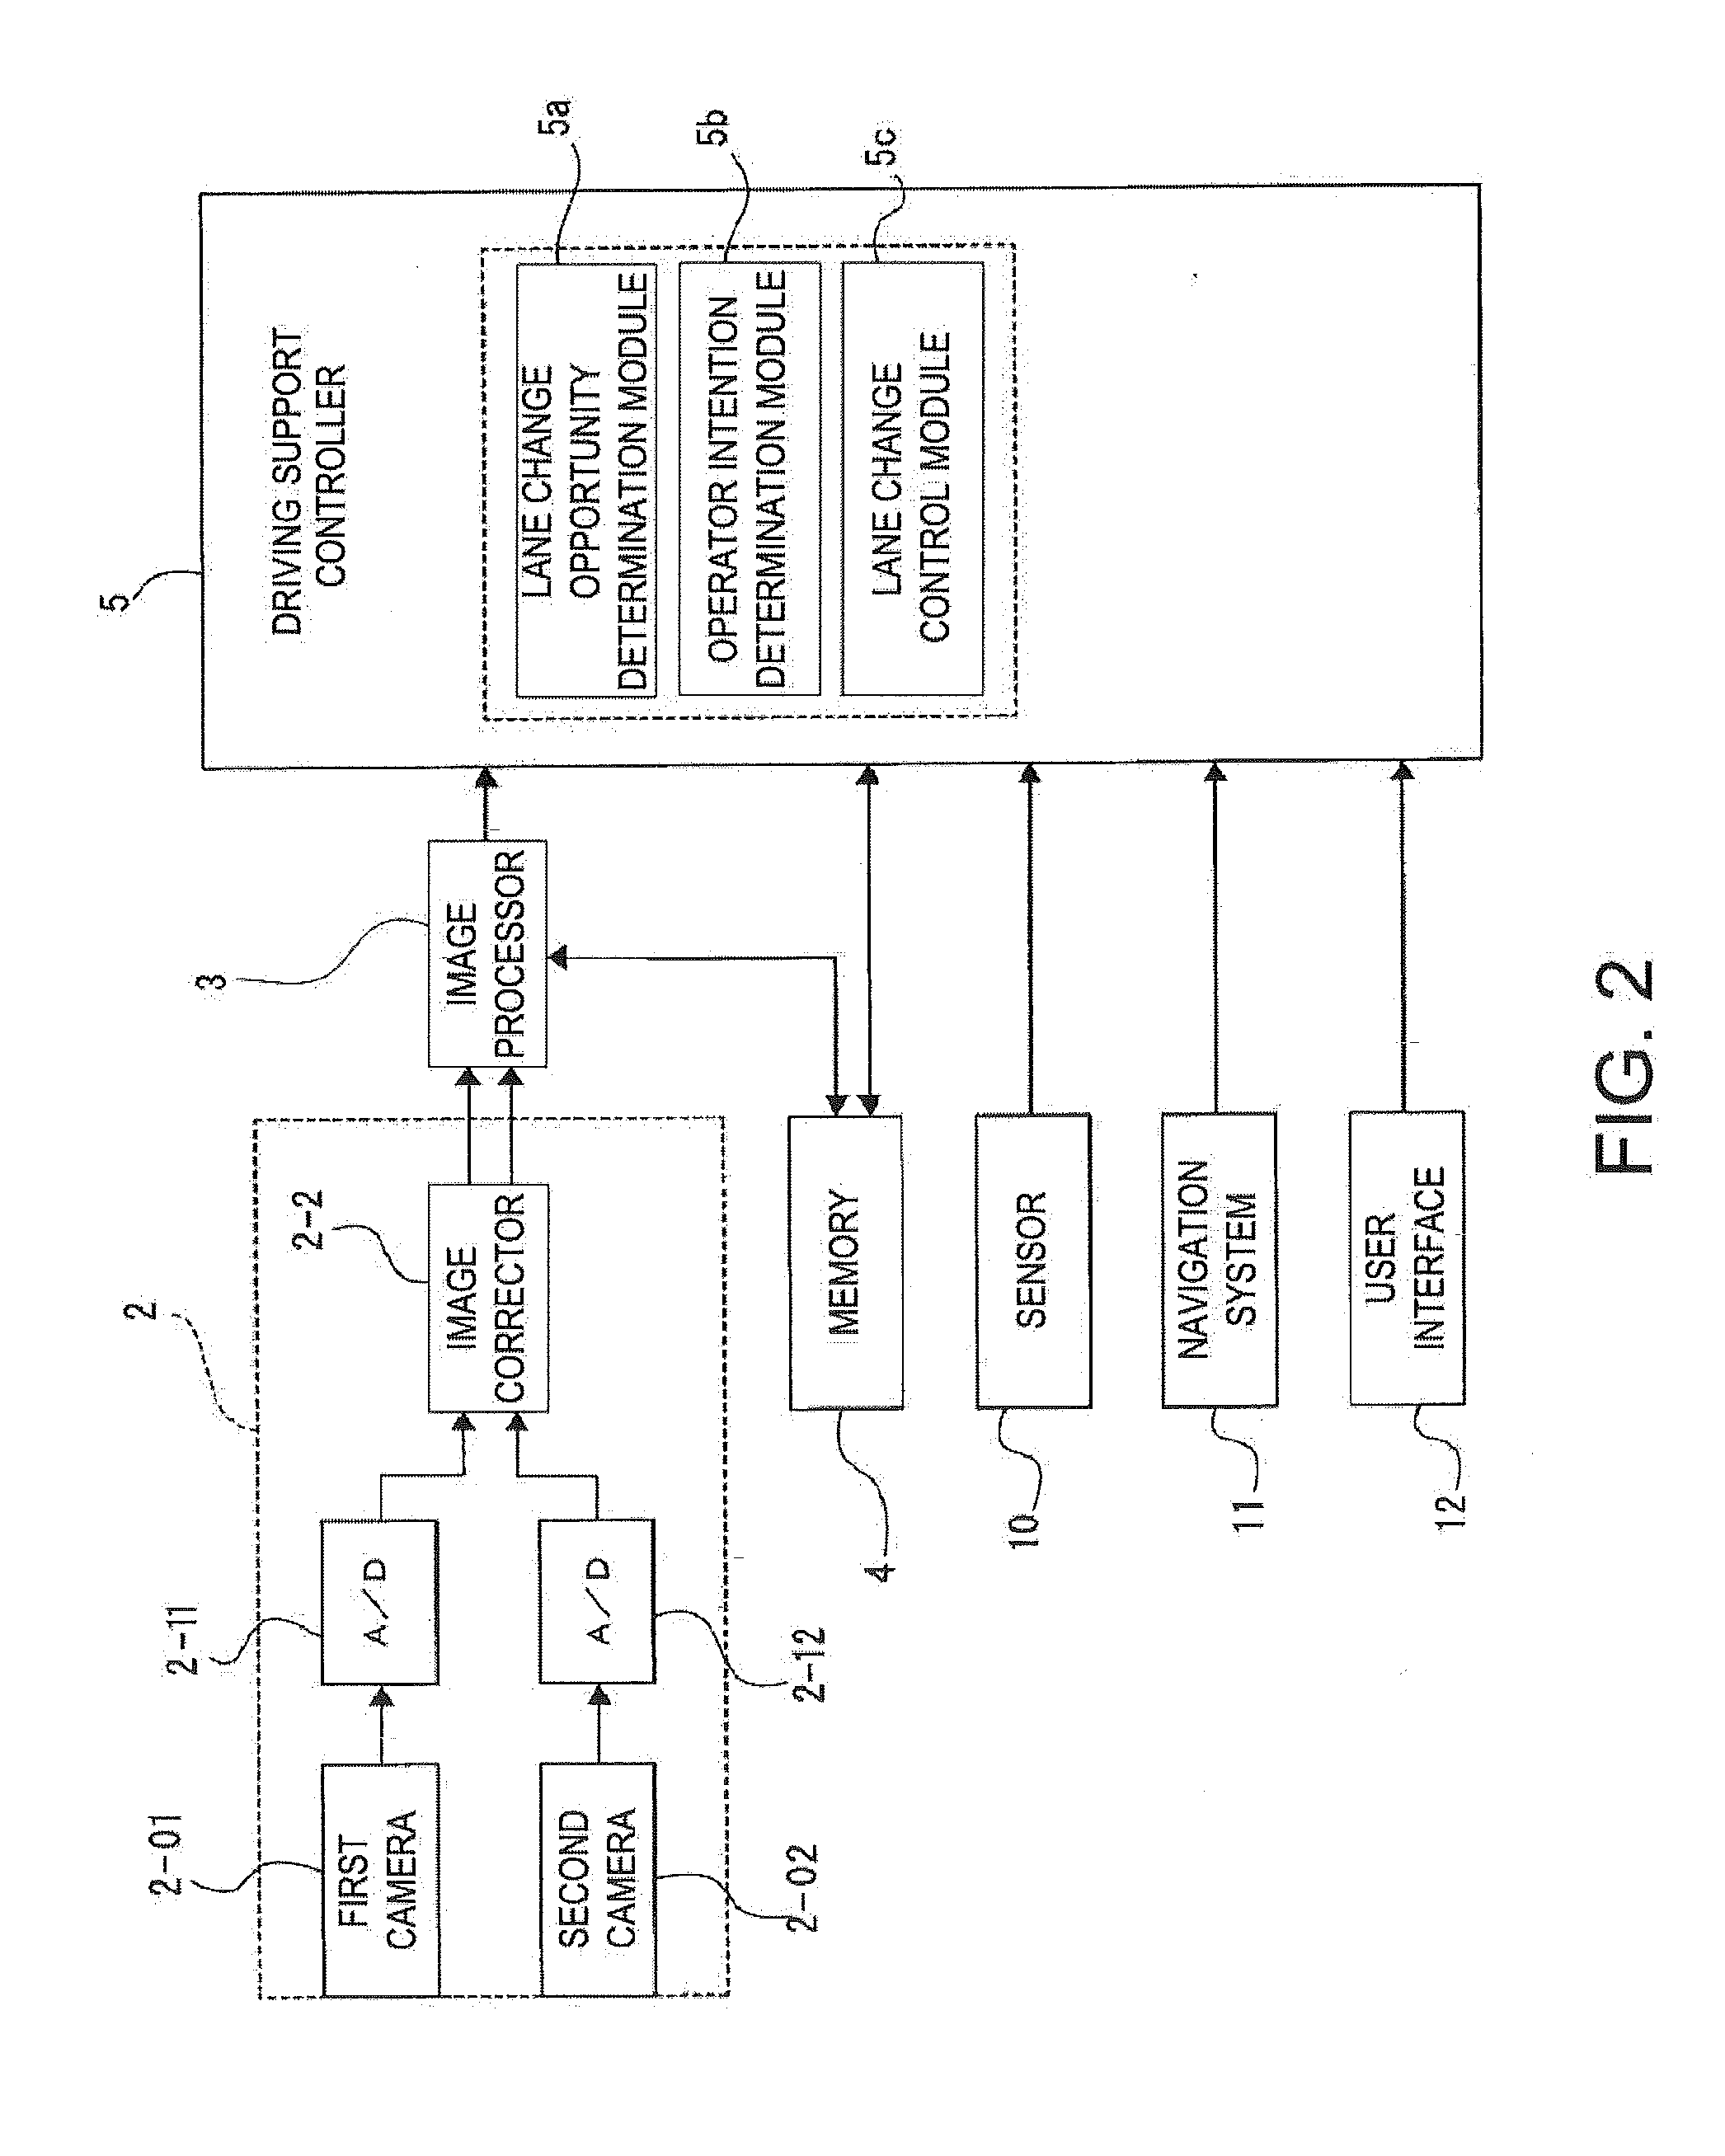 Driving support controller